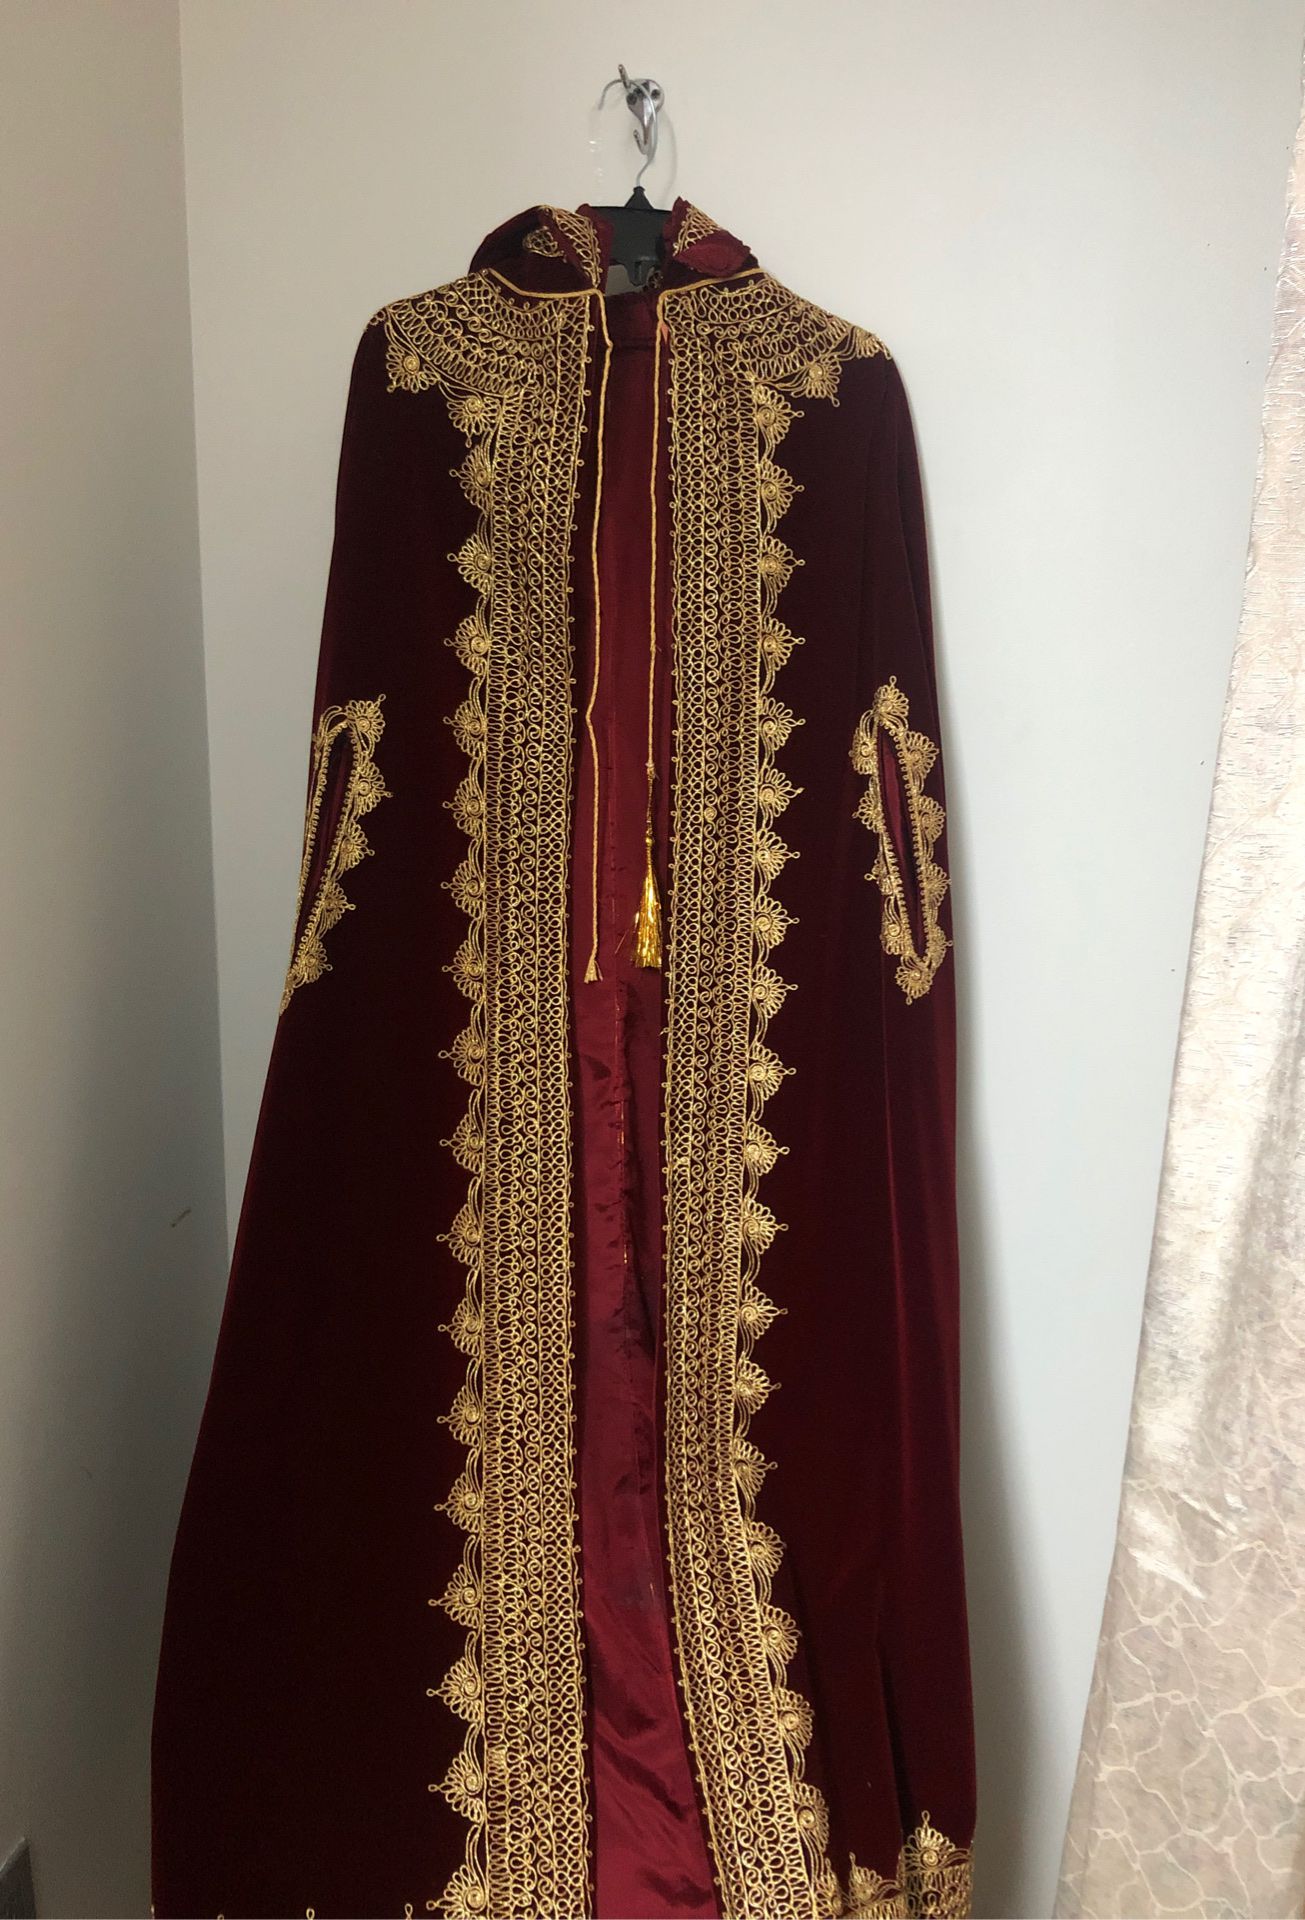 Henna velvet burgundy and gold two pieces outfit